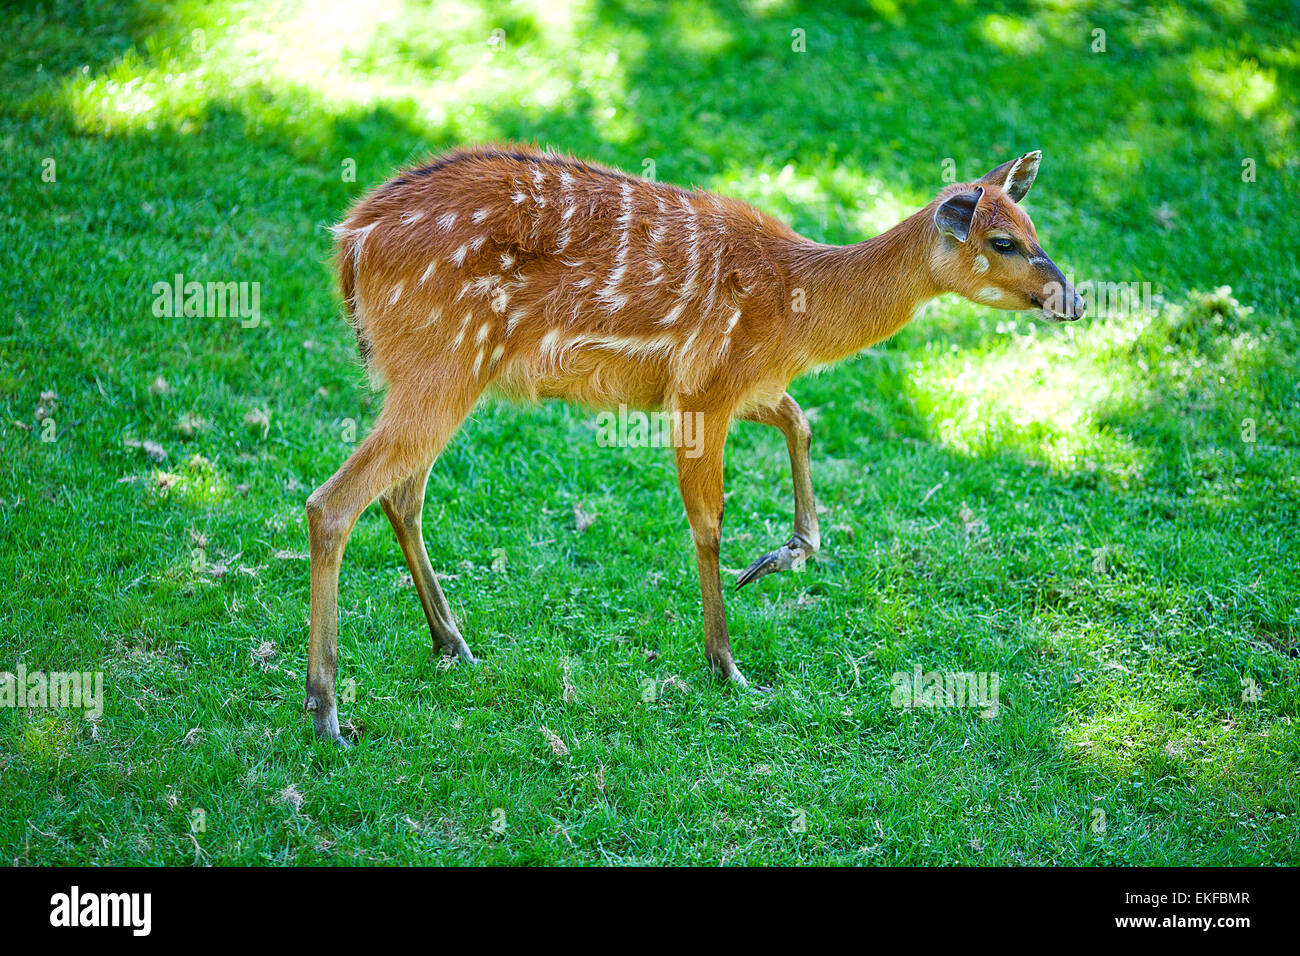 deer on the background of green grass in a zoo Stock Photo